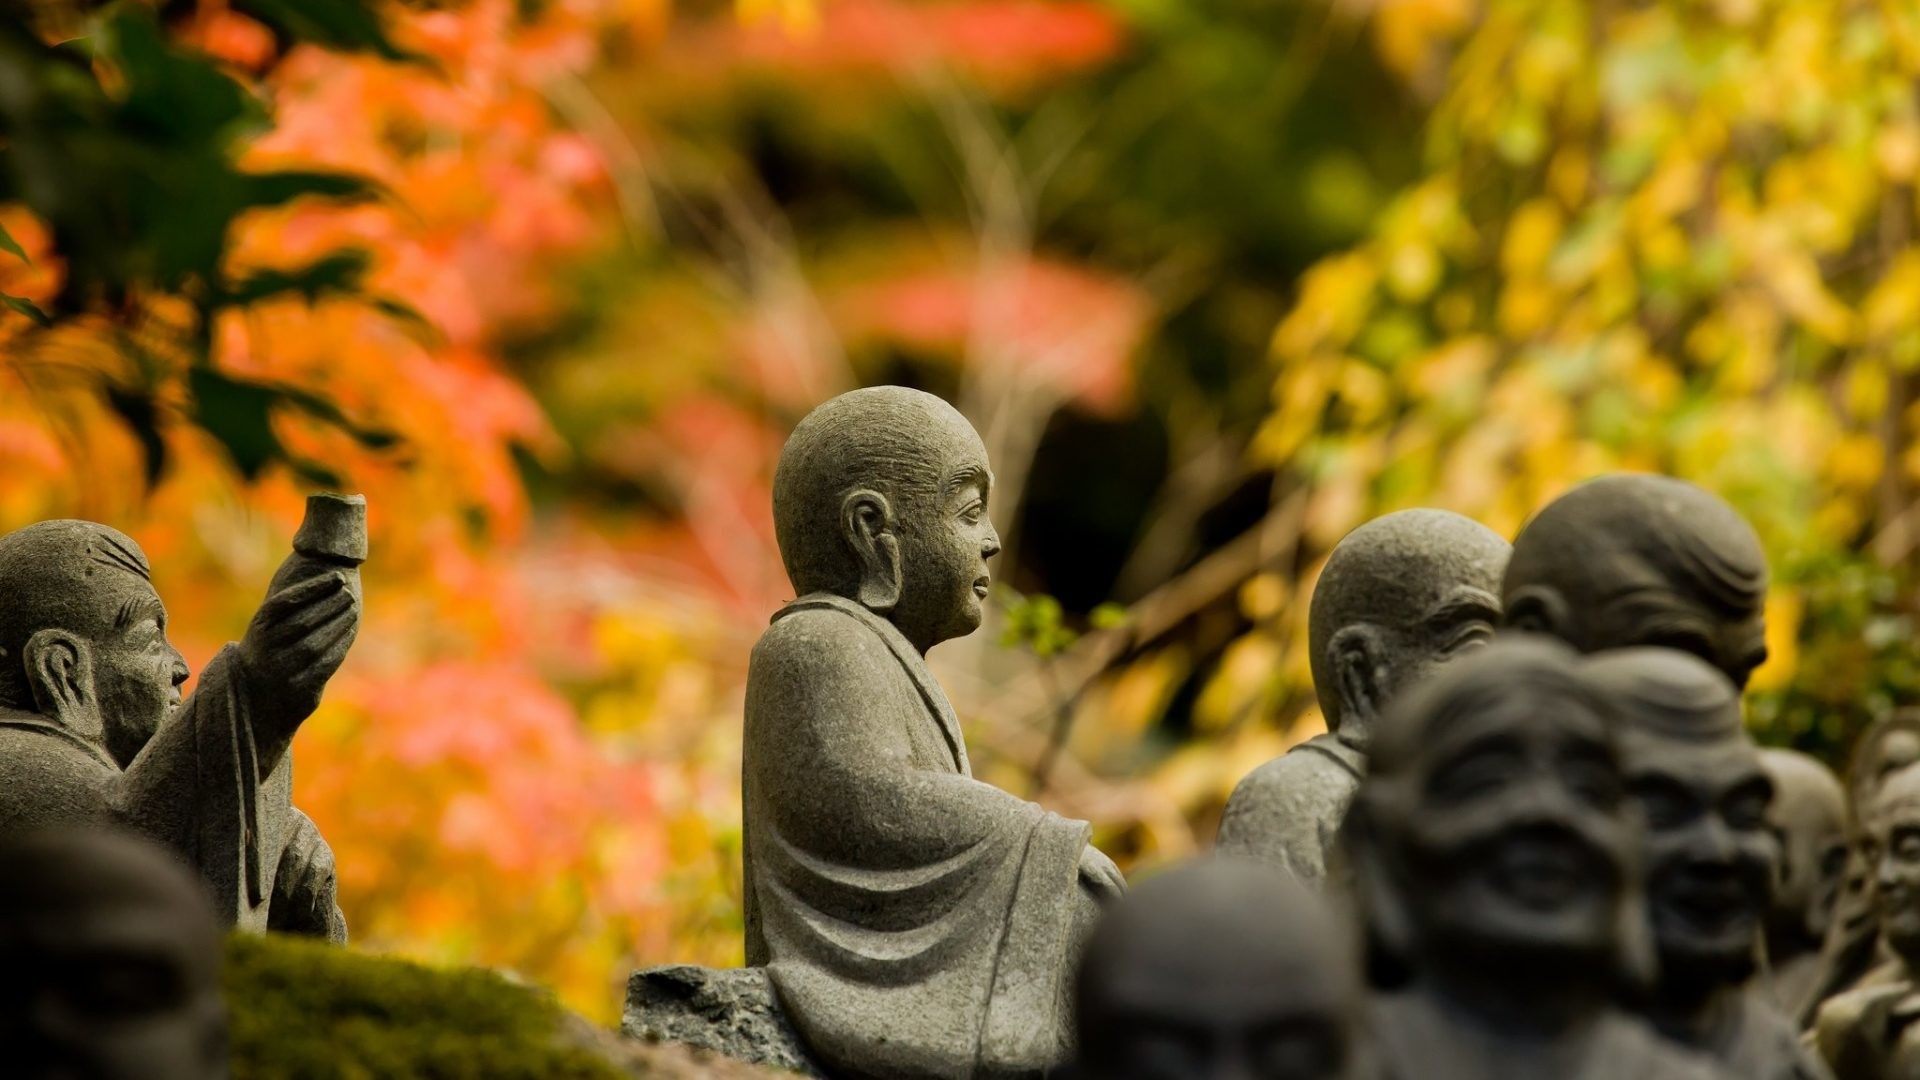 1920x1080 nature-mood-religion-bokeh-garden-buddhism-hd-for-